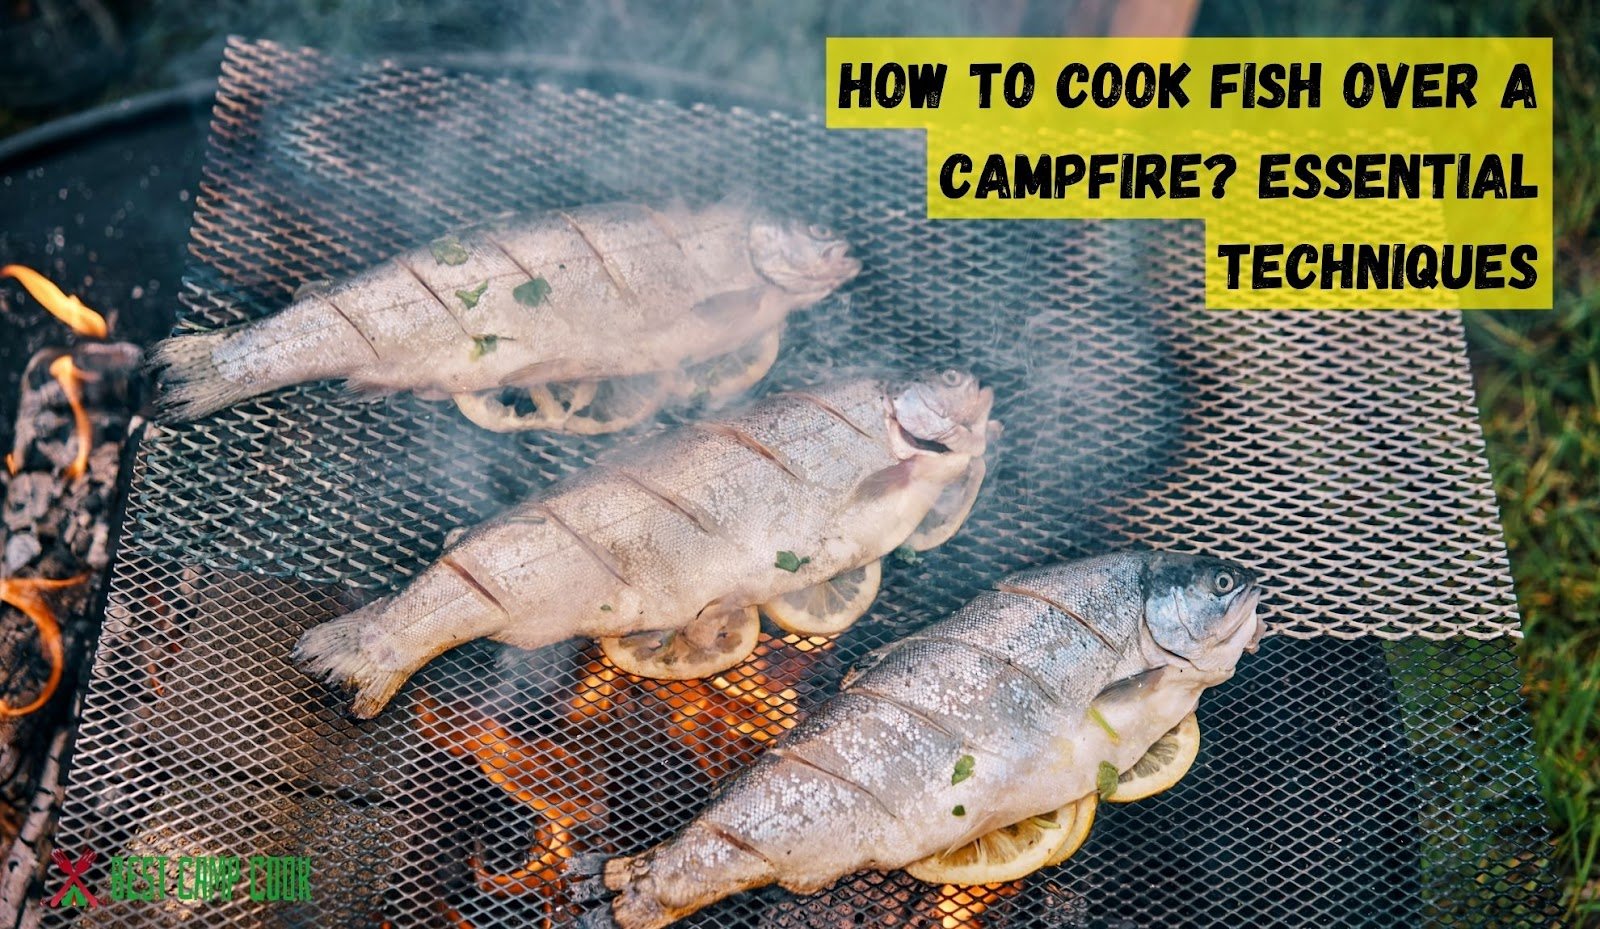 How to Cook Fish Over a Campfire